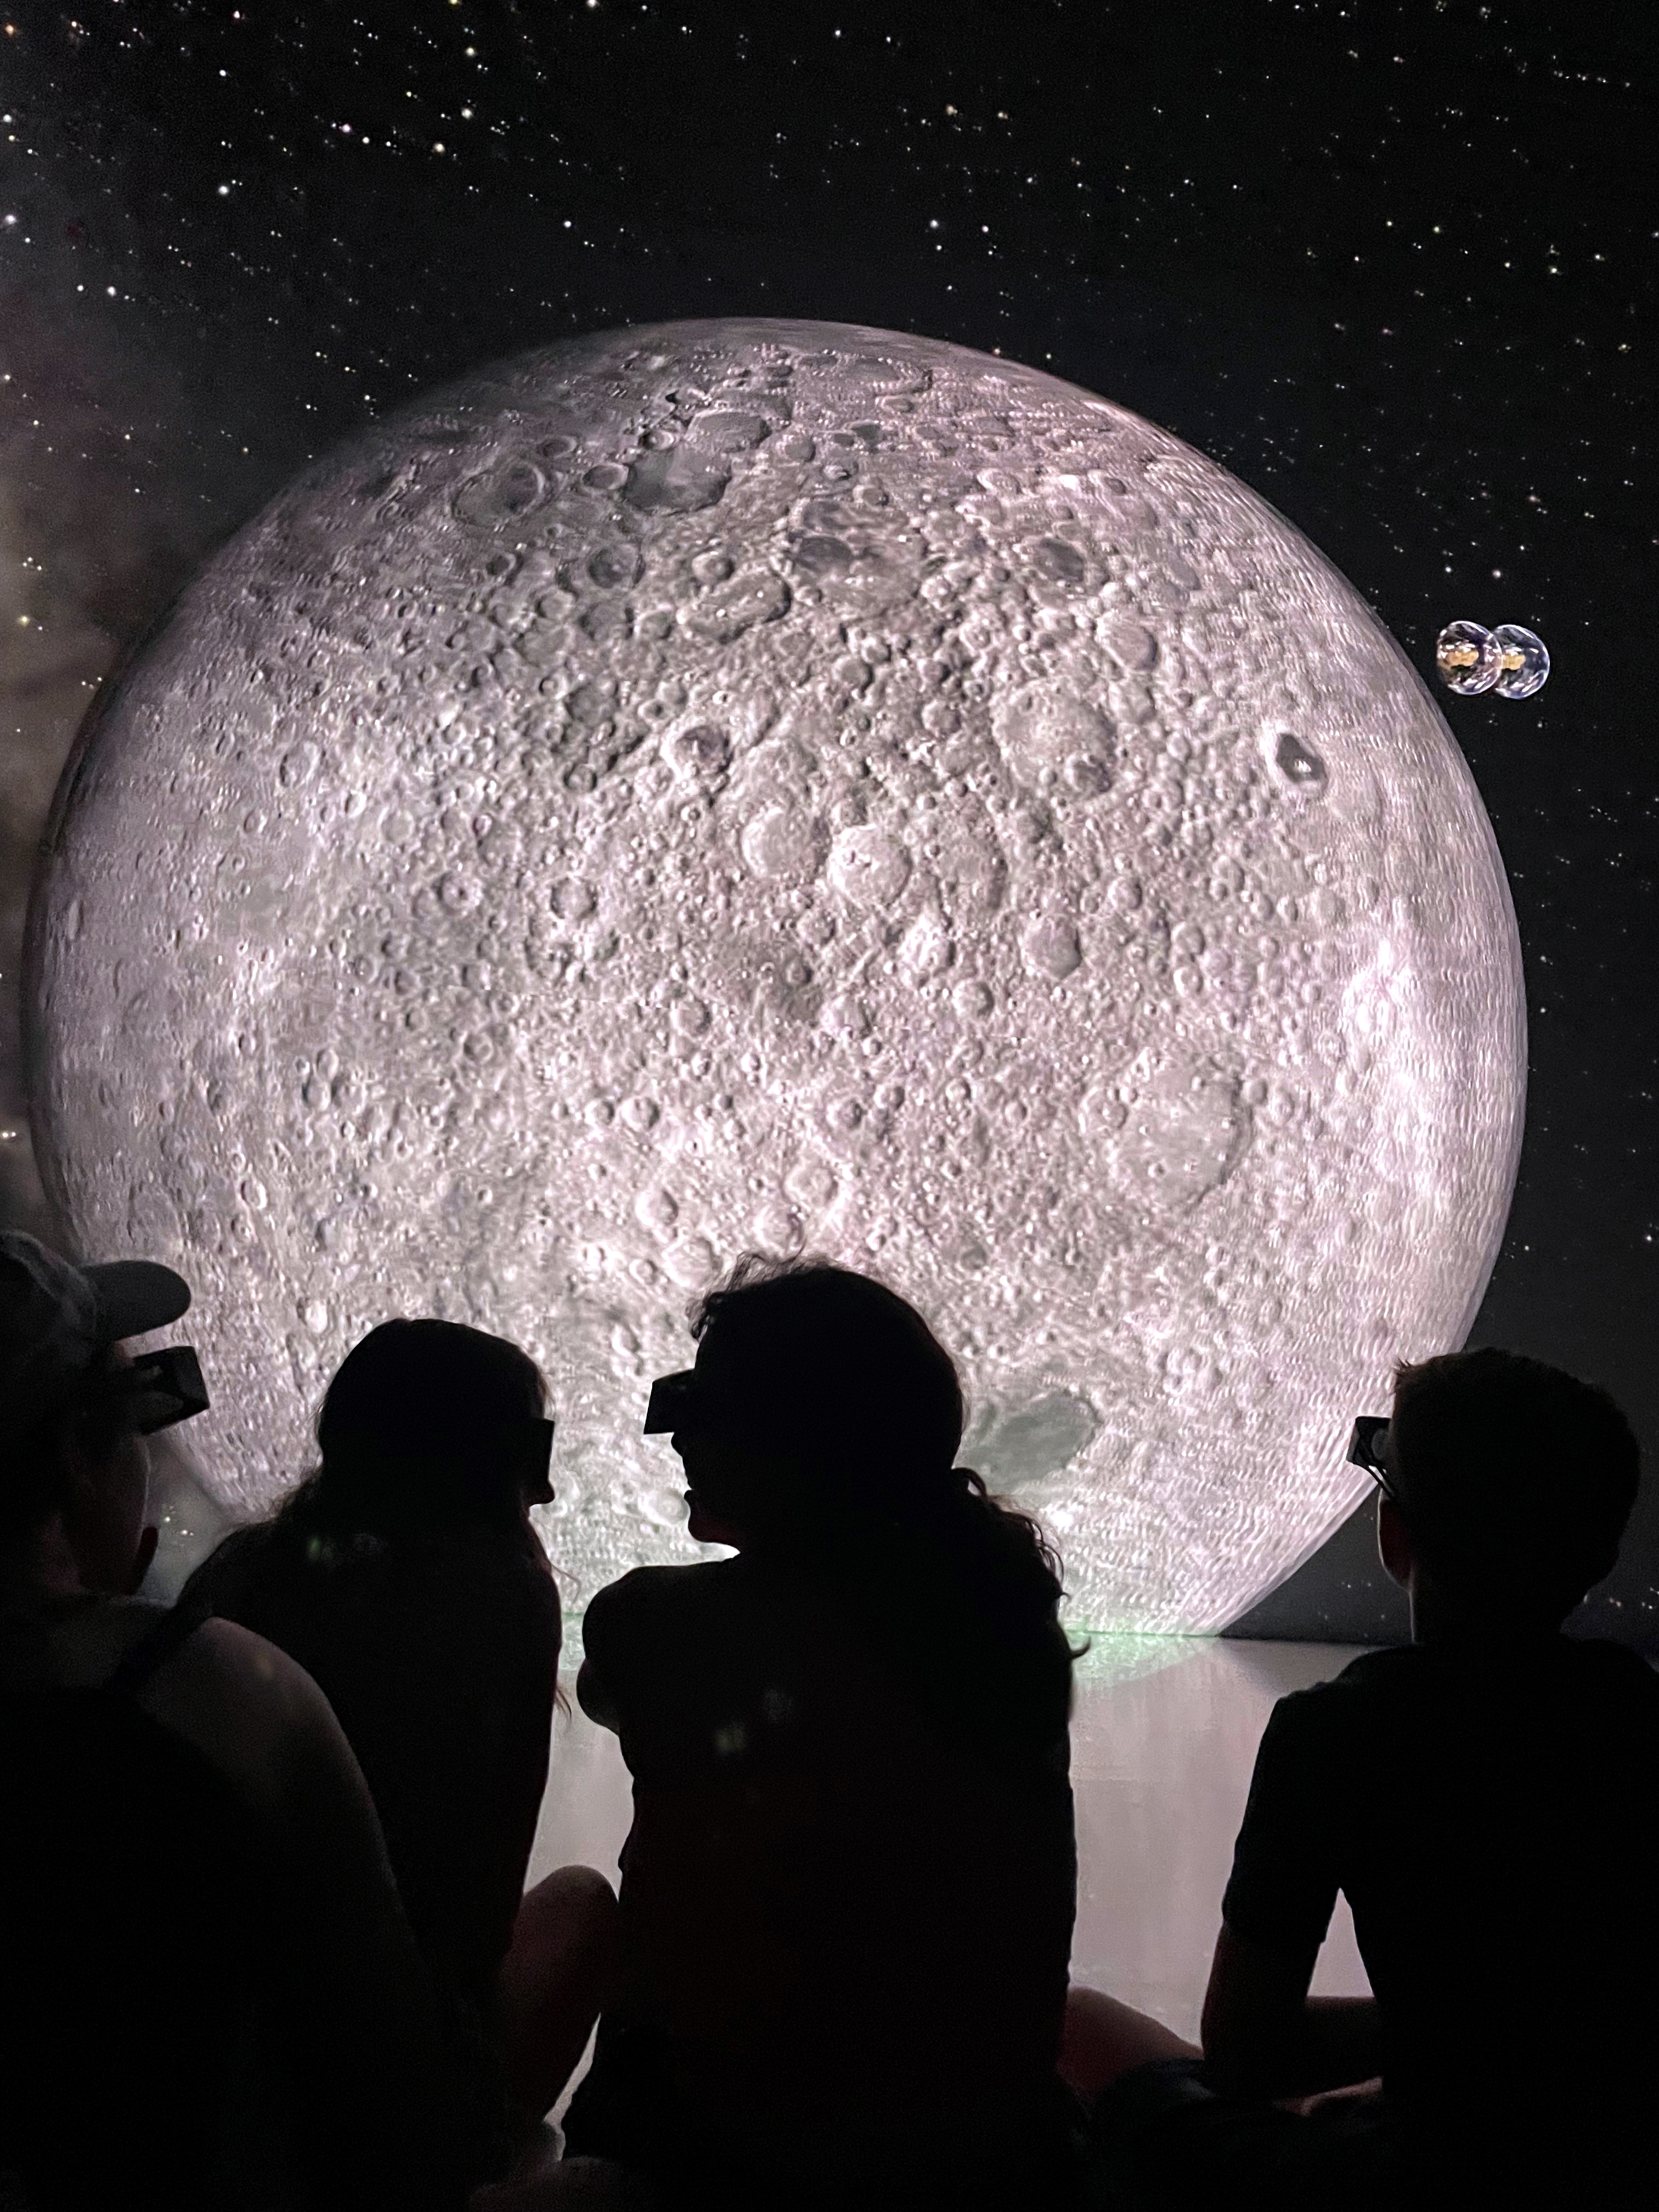 Who wouldn't want to see the moon up close? 
With 3D glasses, this is possible in Deep Space 8K.